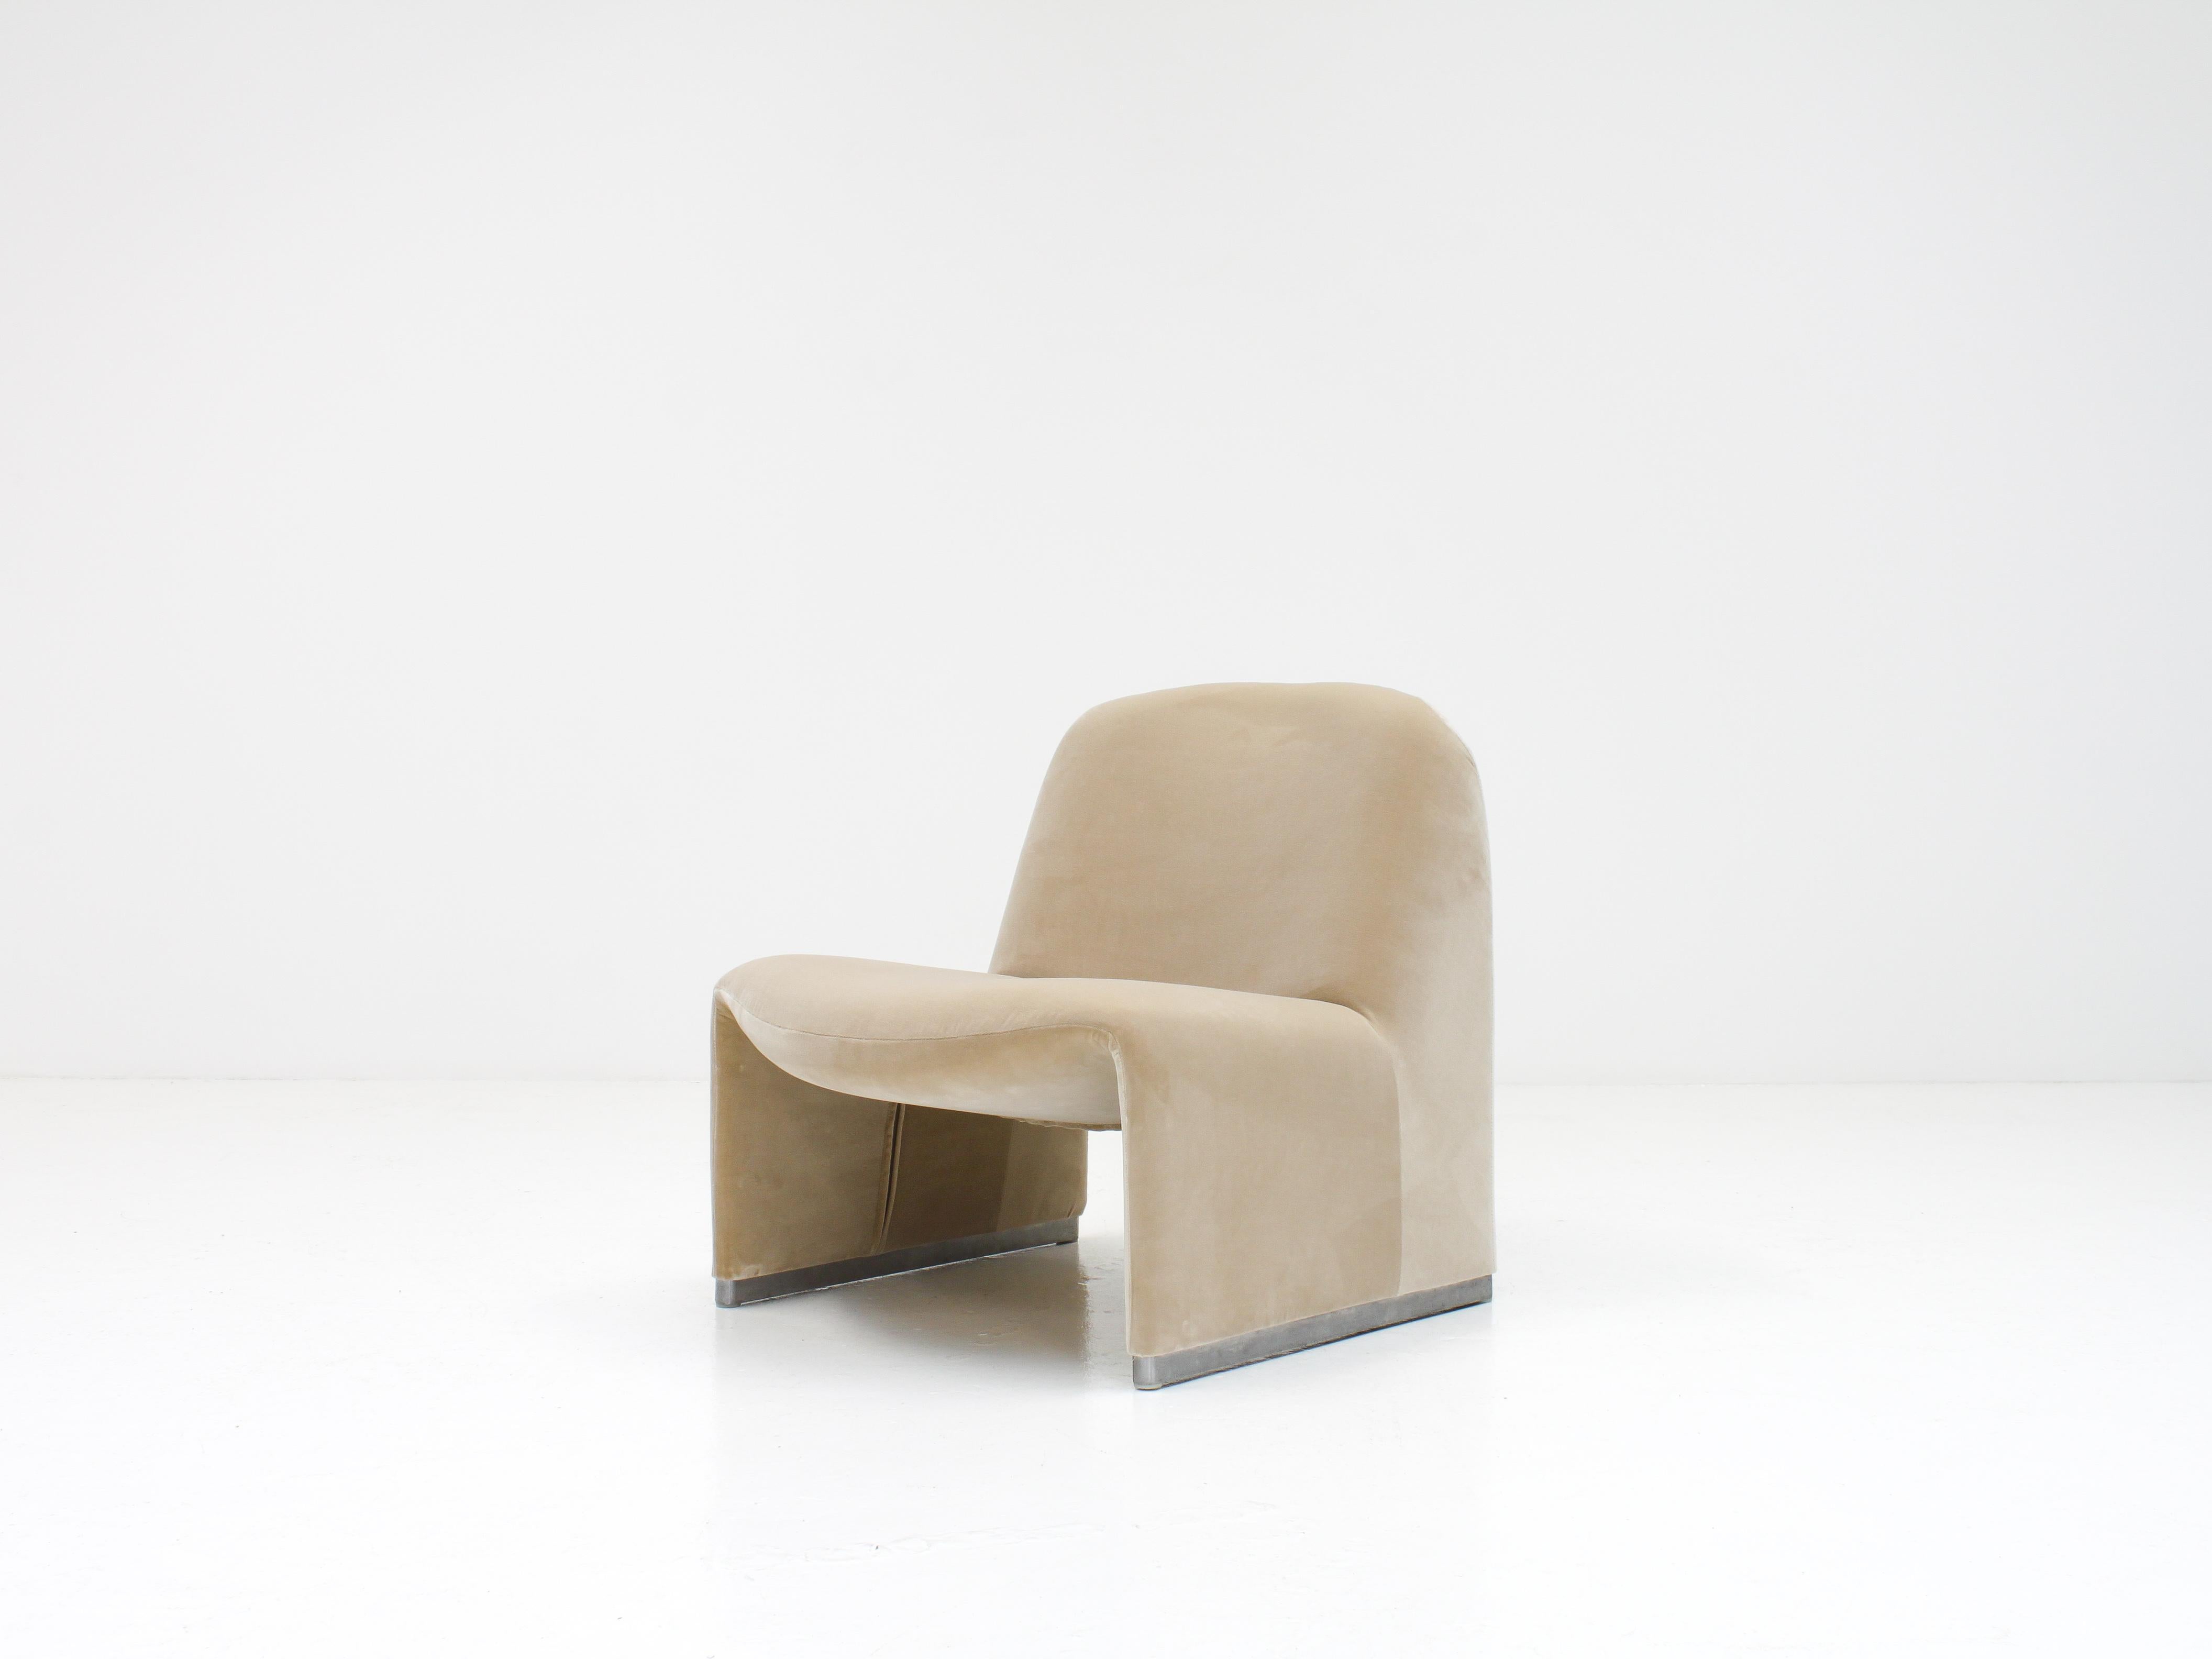 Giancarlo Piretti “Alky” Chairs in New Velvet, Artifort, 1970s - *Customizable* For Sale 4